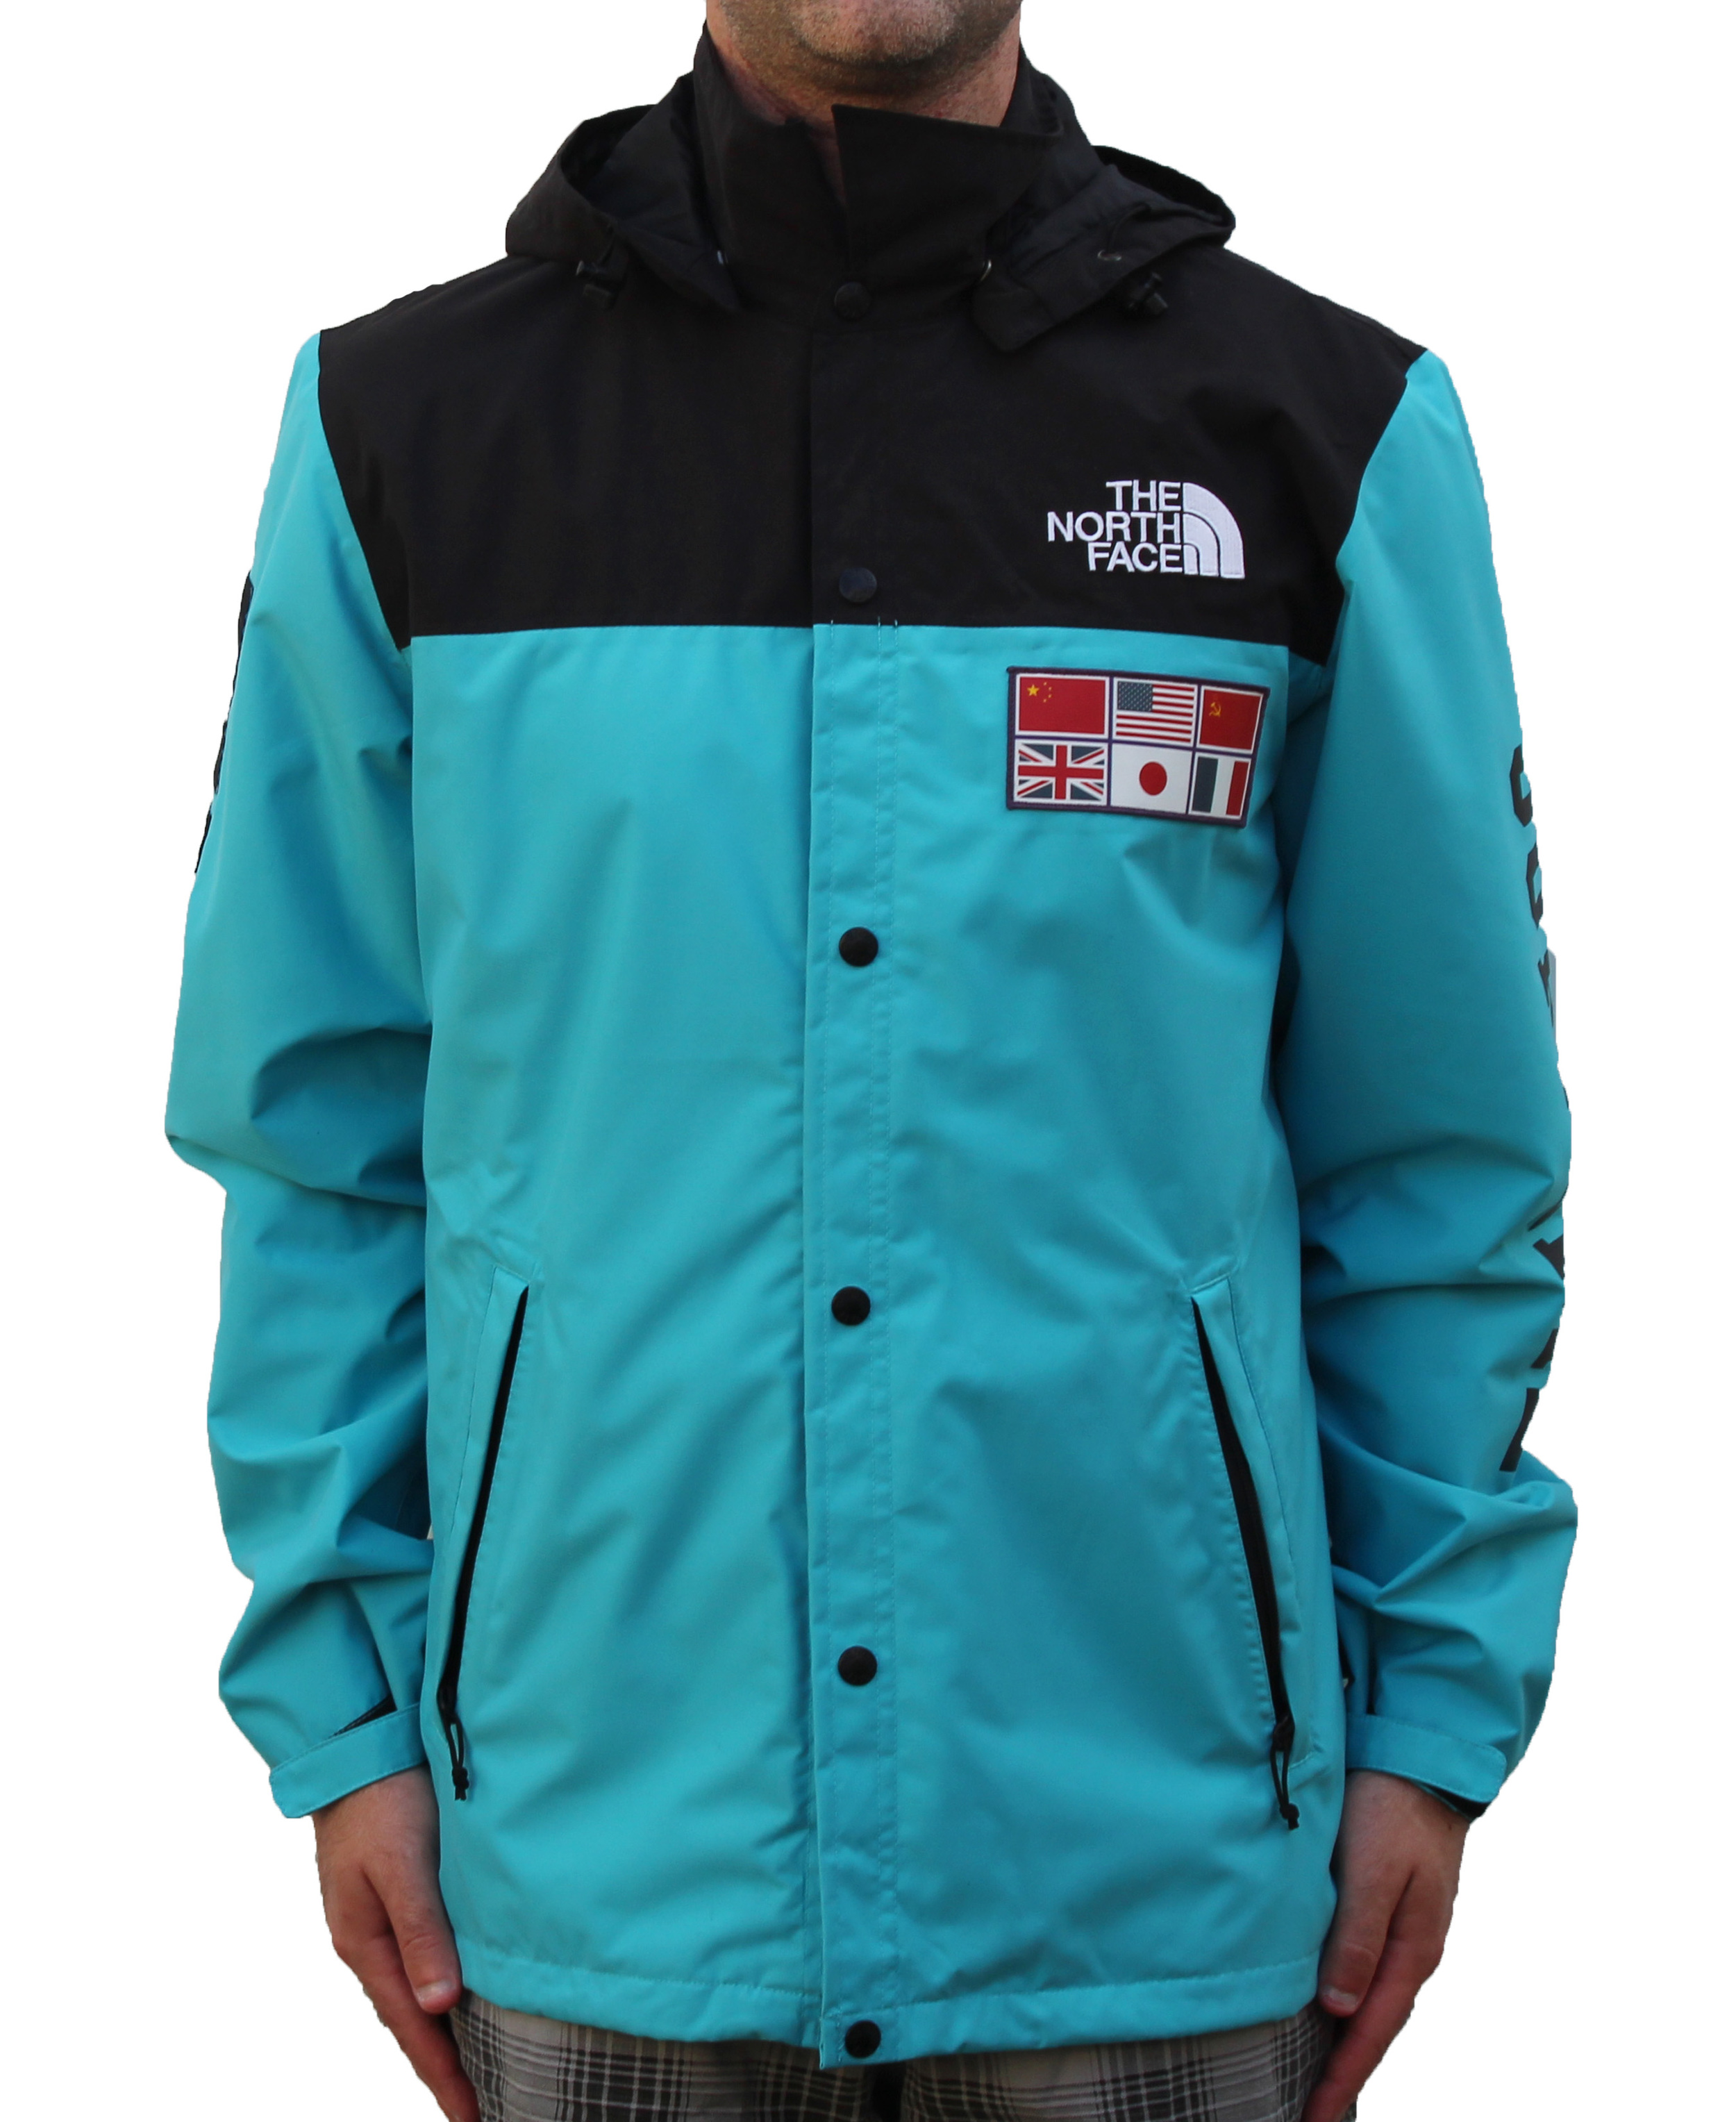 Supreme x The North Face Teal Expedition Jacket (Size L) — Roots